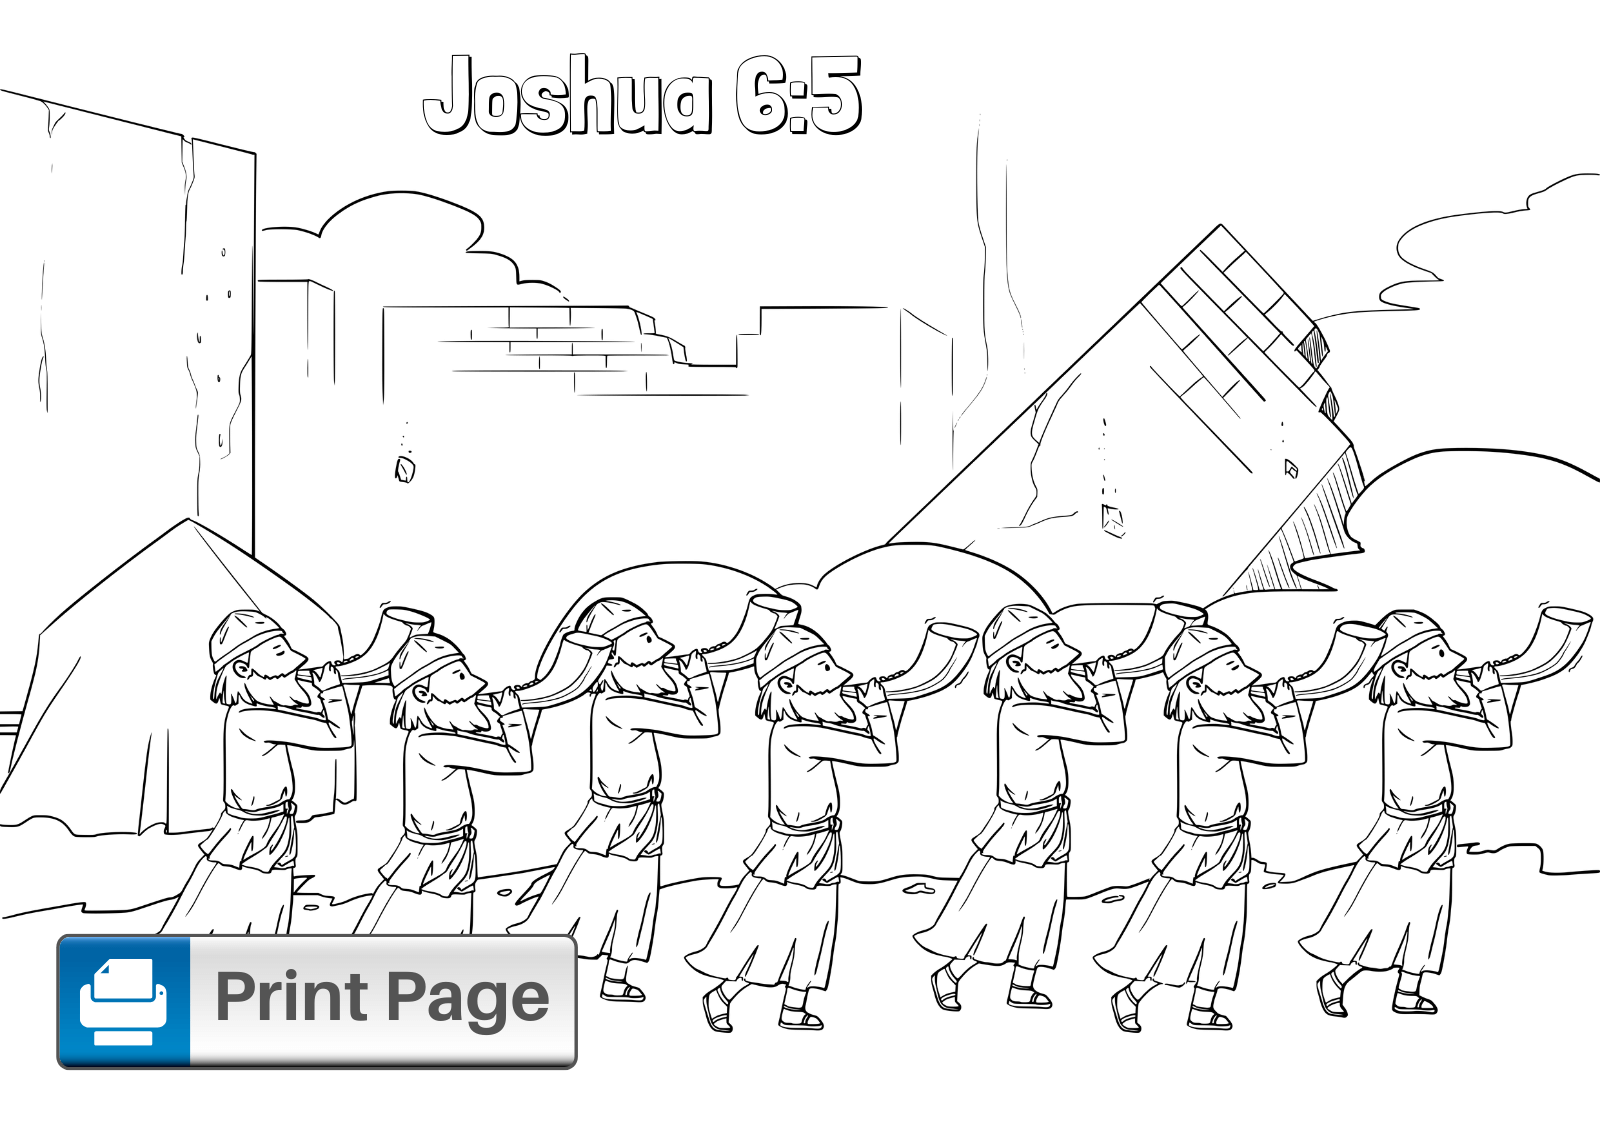 Free walls of jericho coloring pages for kids printable pdfs â connectus